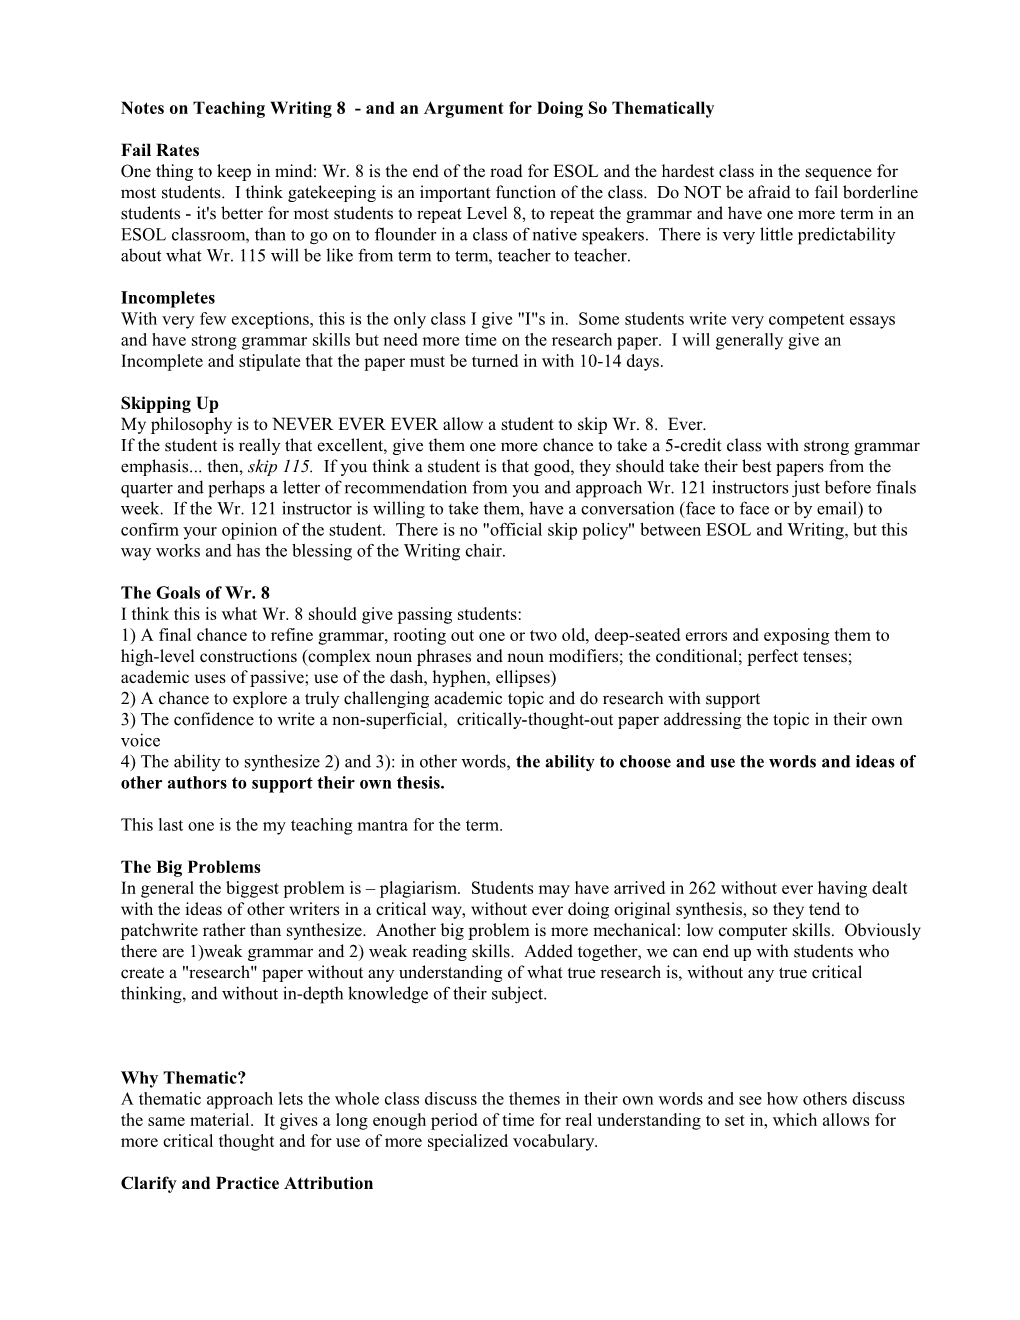 Notes on Teaching Writing 8 Thematically